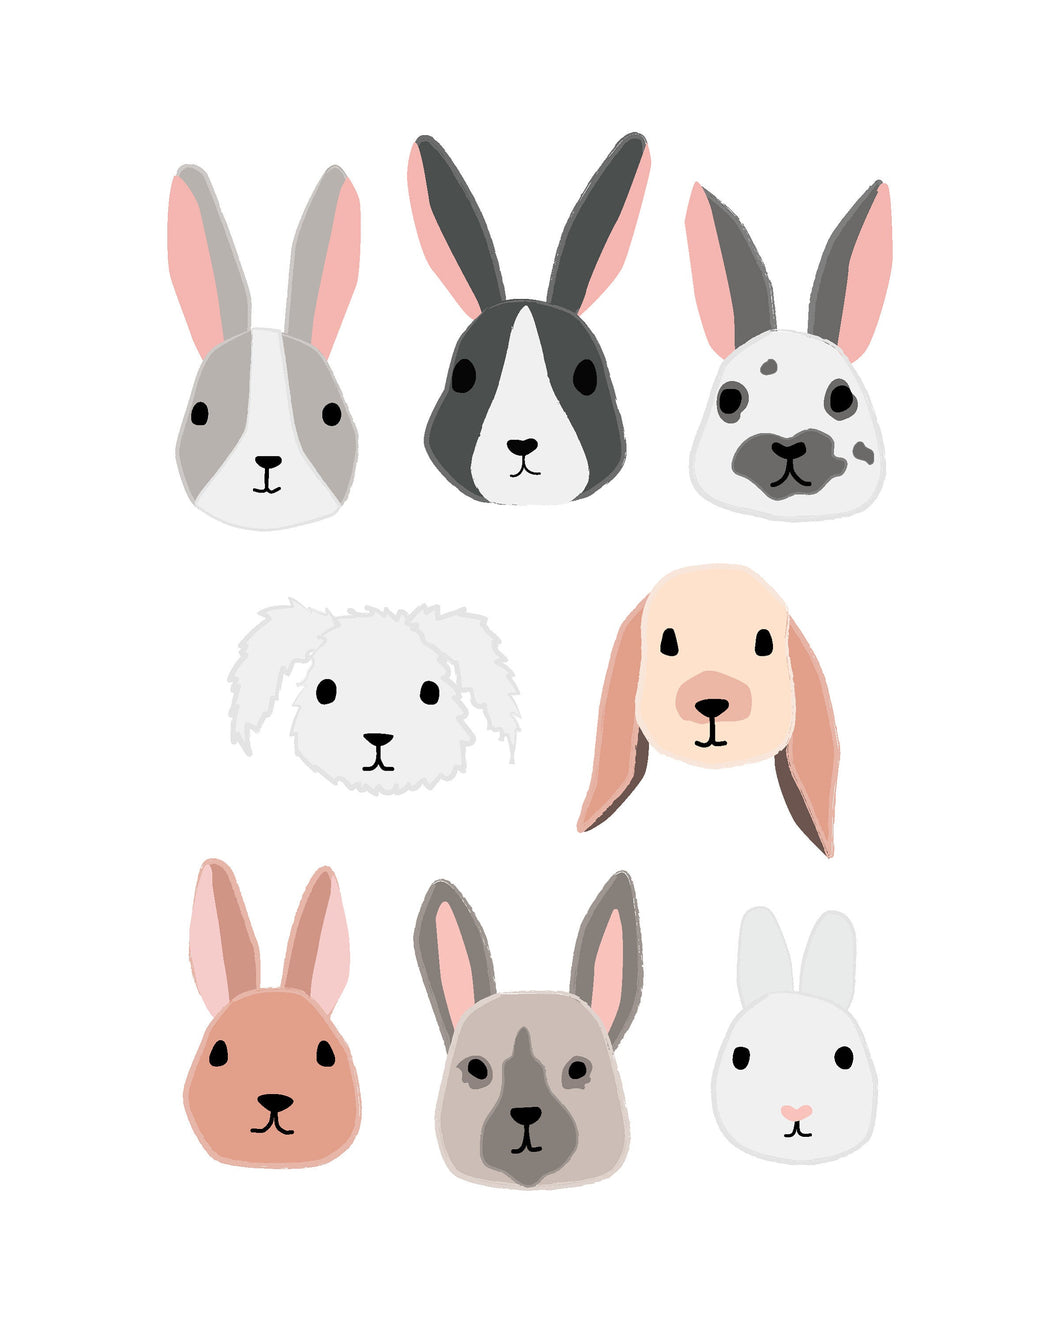 Bunny Rabbit Faces Illustrations - art for party and wall decor